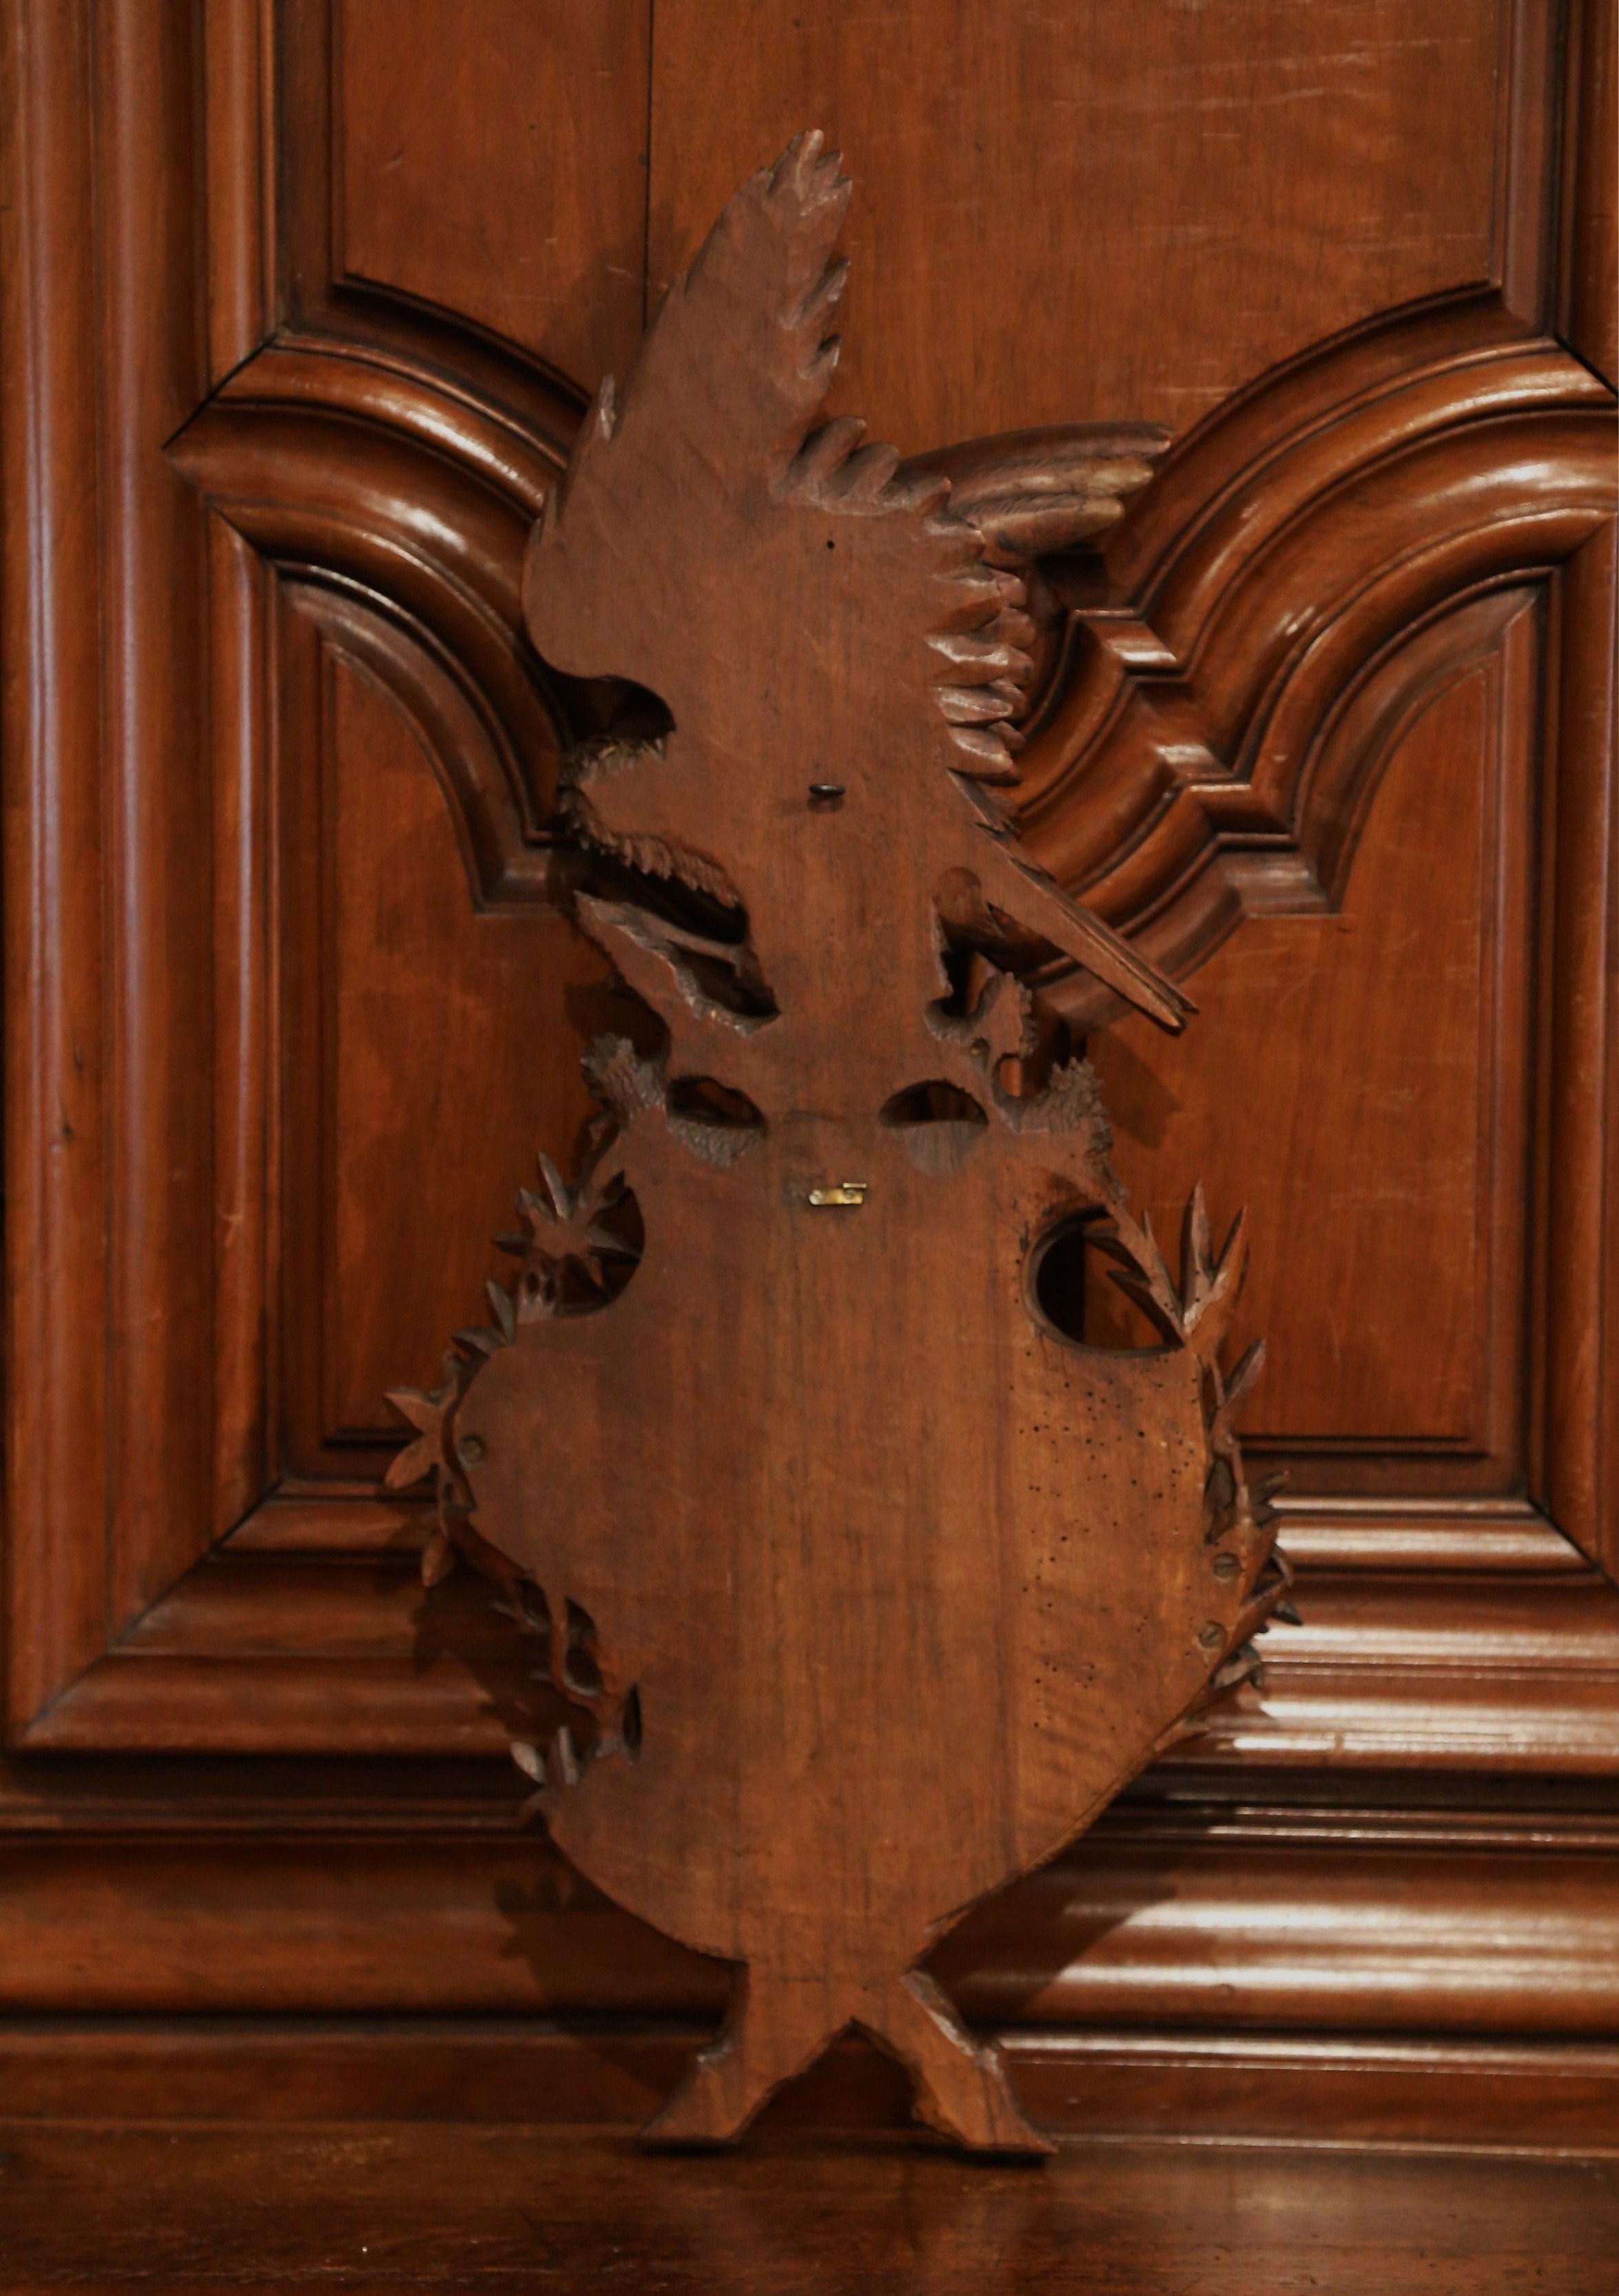 19th Century French Black Forest Carved Walnut Mirror with Eagle Sculpture 3